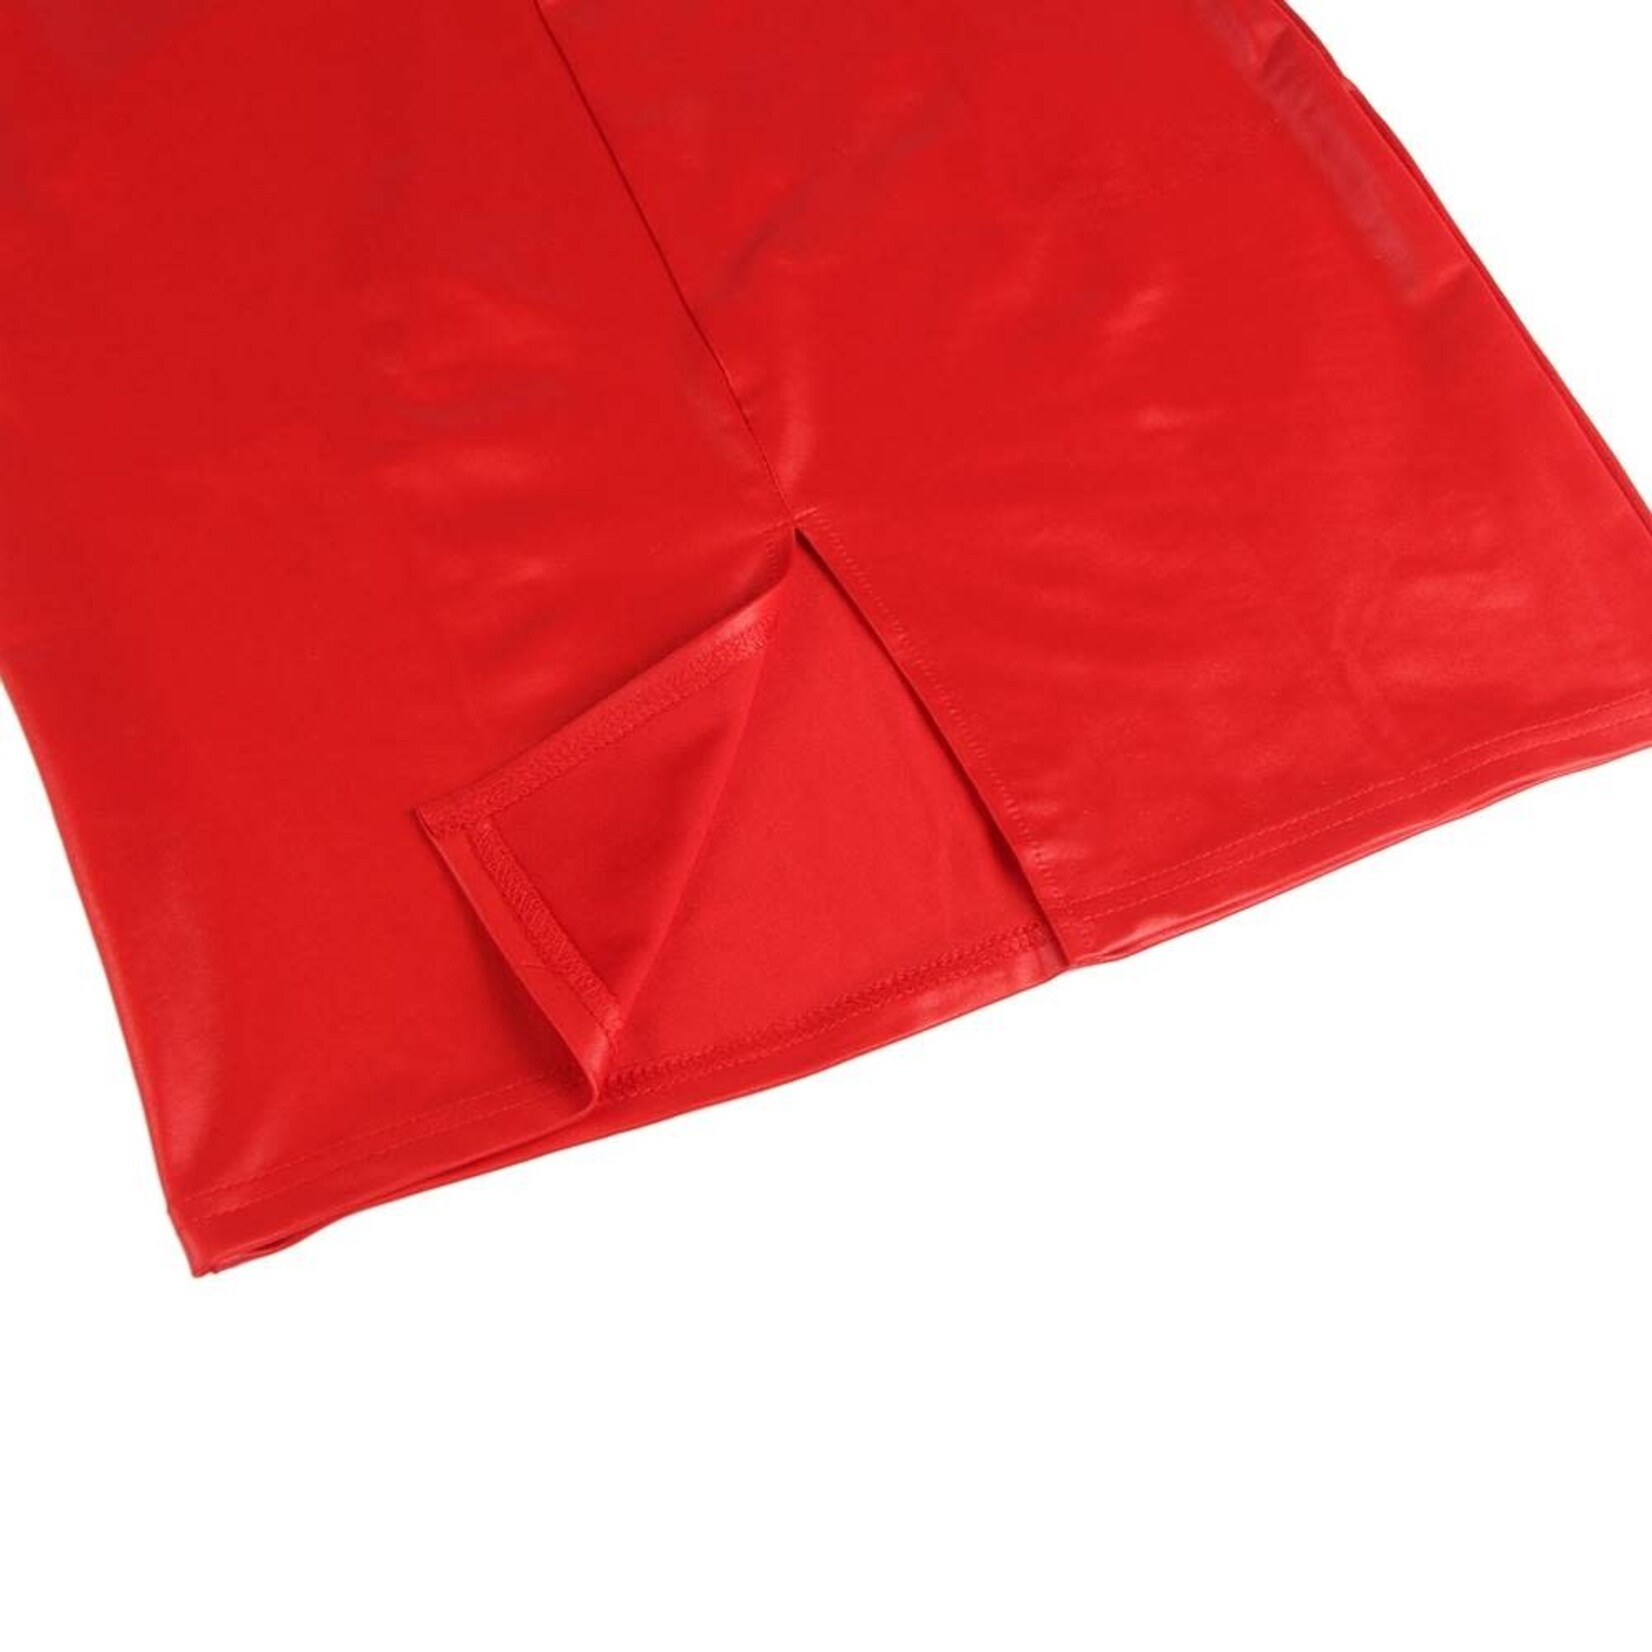 OH YEAH! -  SEXY BAG HIP TIGHT NIGHTCLUB RED LEATHER SKIRT XS-S